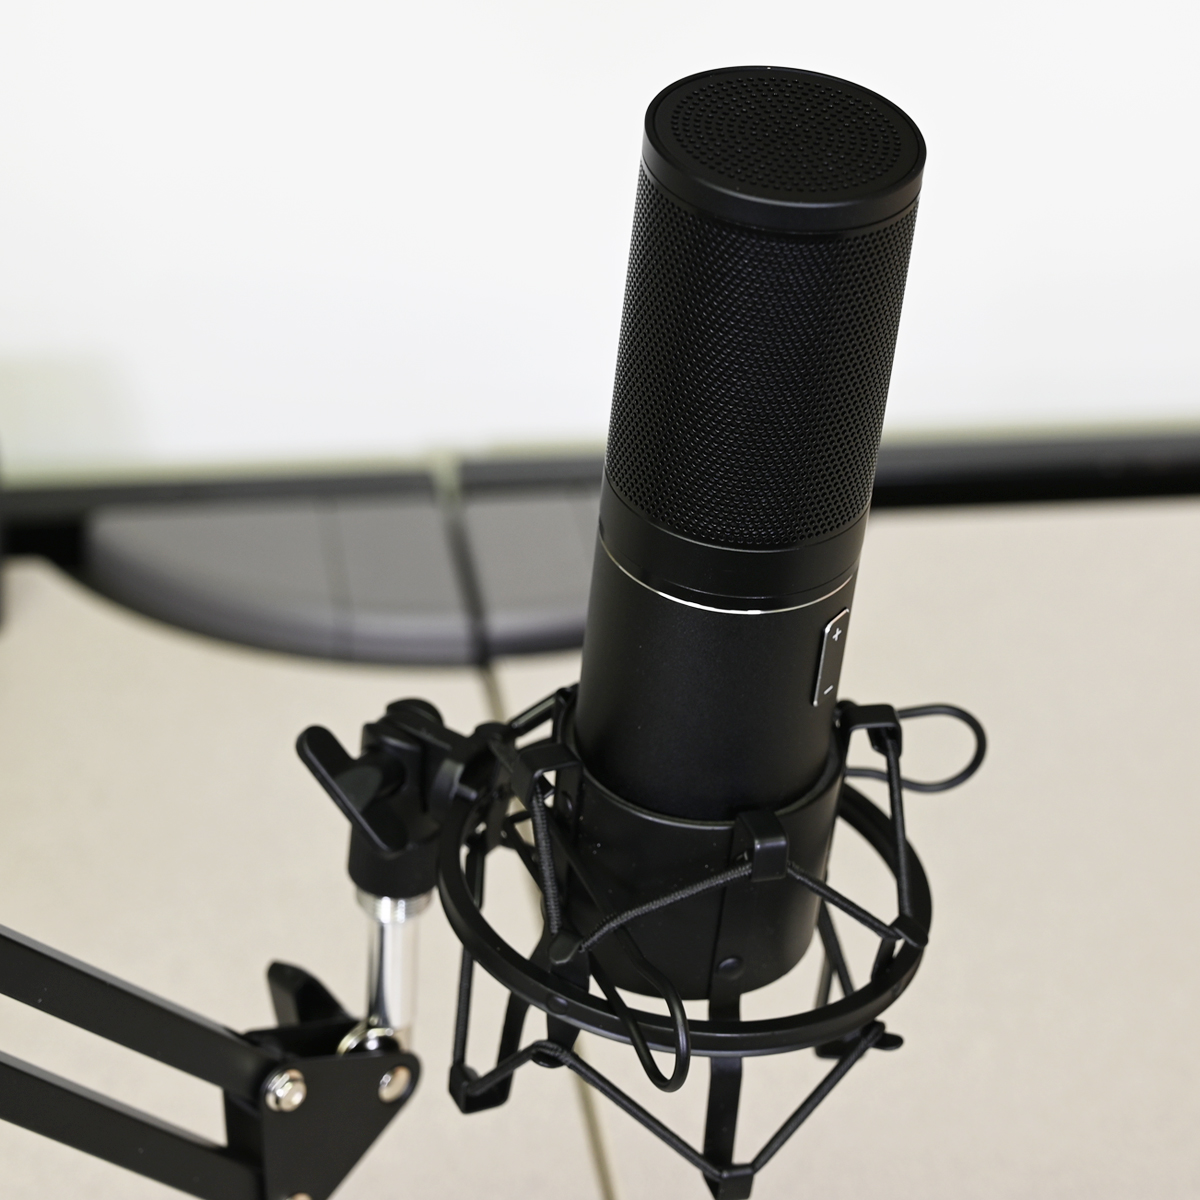 How To Set Up and Test Microphones in Windows 10 Using TONOR Q9